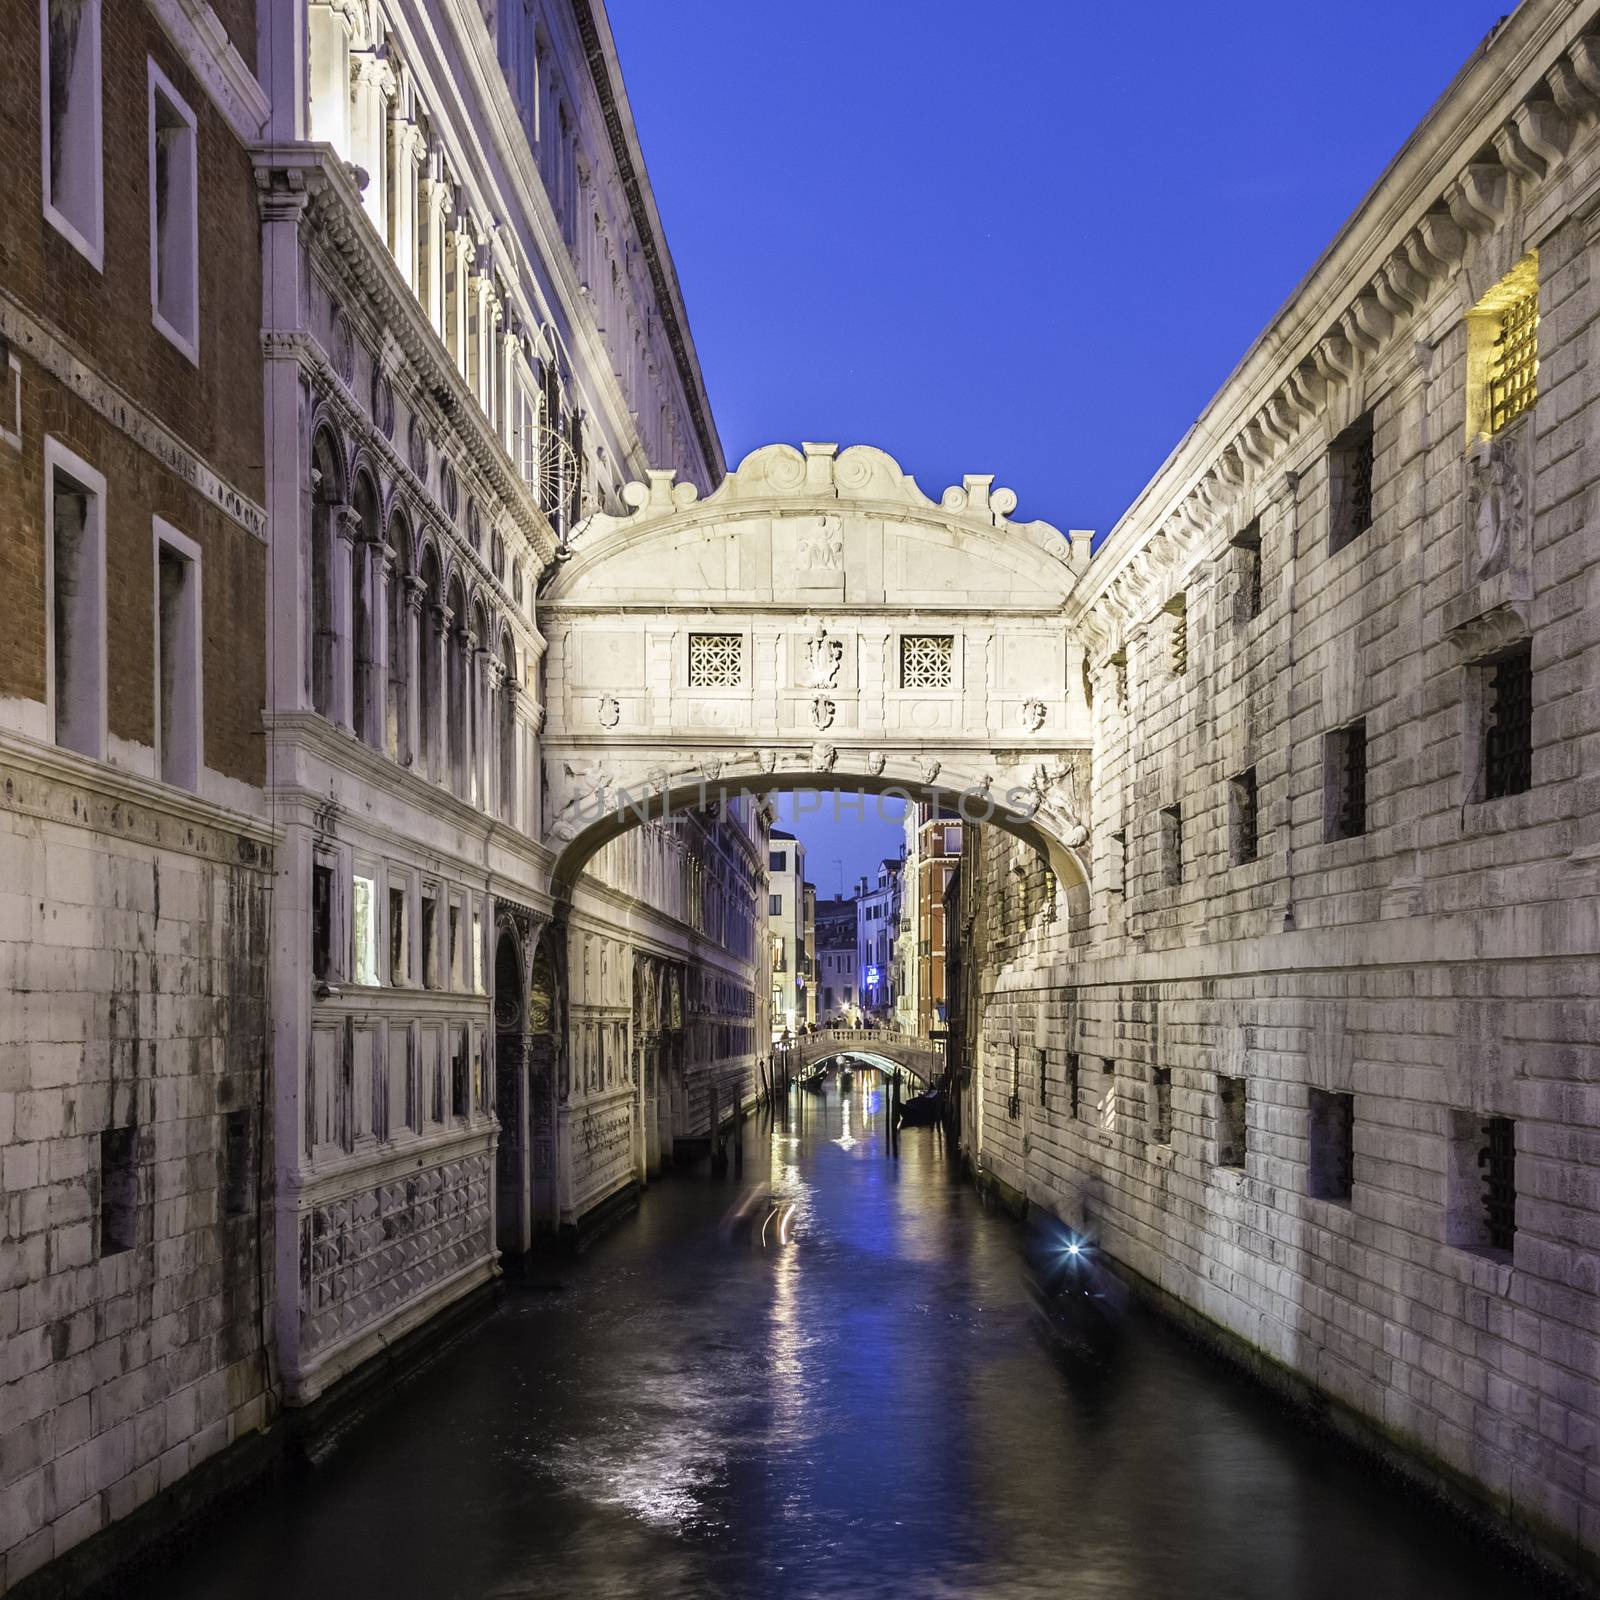 Gondolas passing under Bridge of Sighs, Ponte dei Sospiri. A legend says that lovers will be granted eternal love if they kiss on a gondola at sunset under the Bridge. Venice,Veneto, Italy, Europe. 